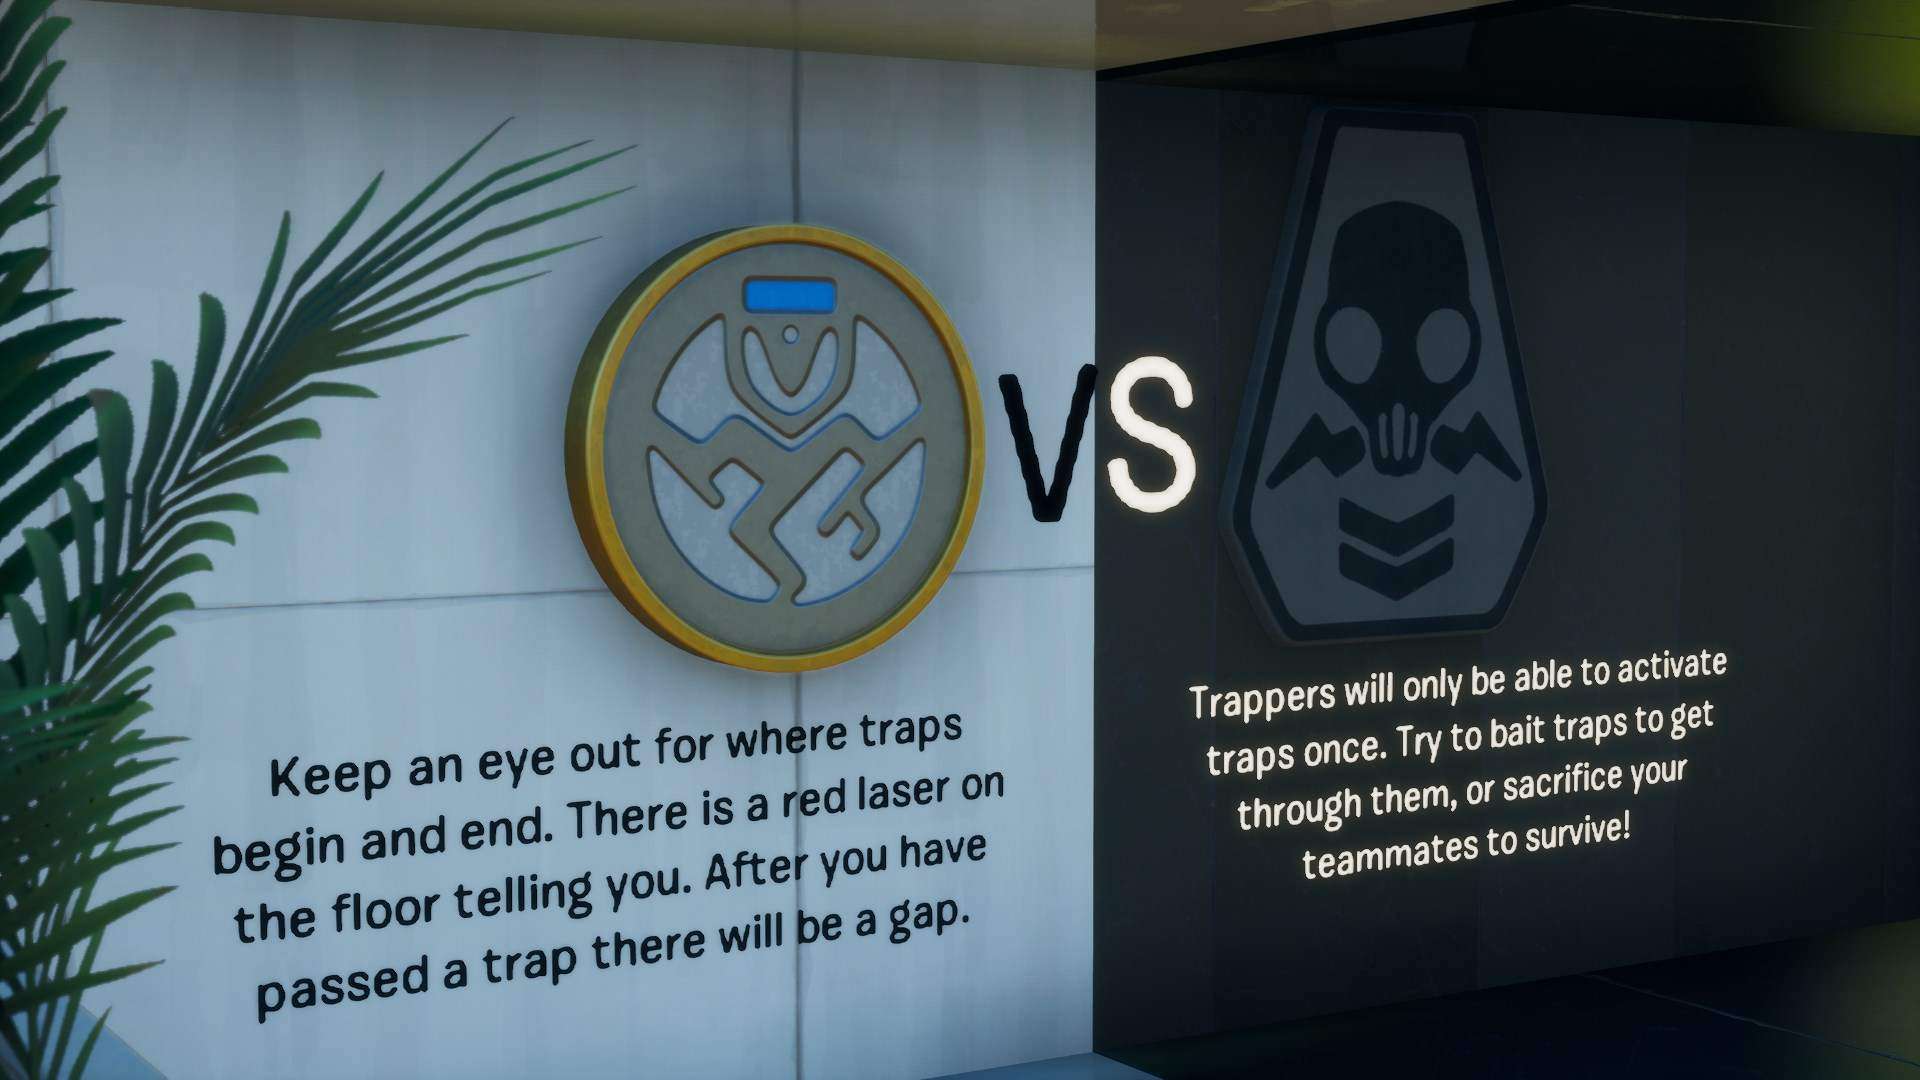 SHADOW VS GHOST - TRAPPERS VS RUNNERS image 3